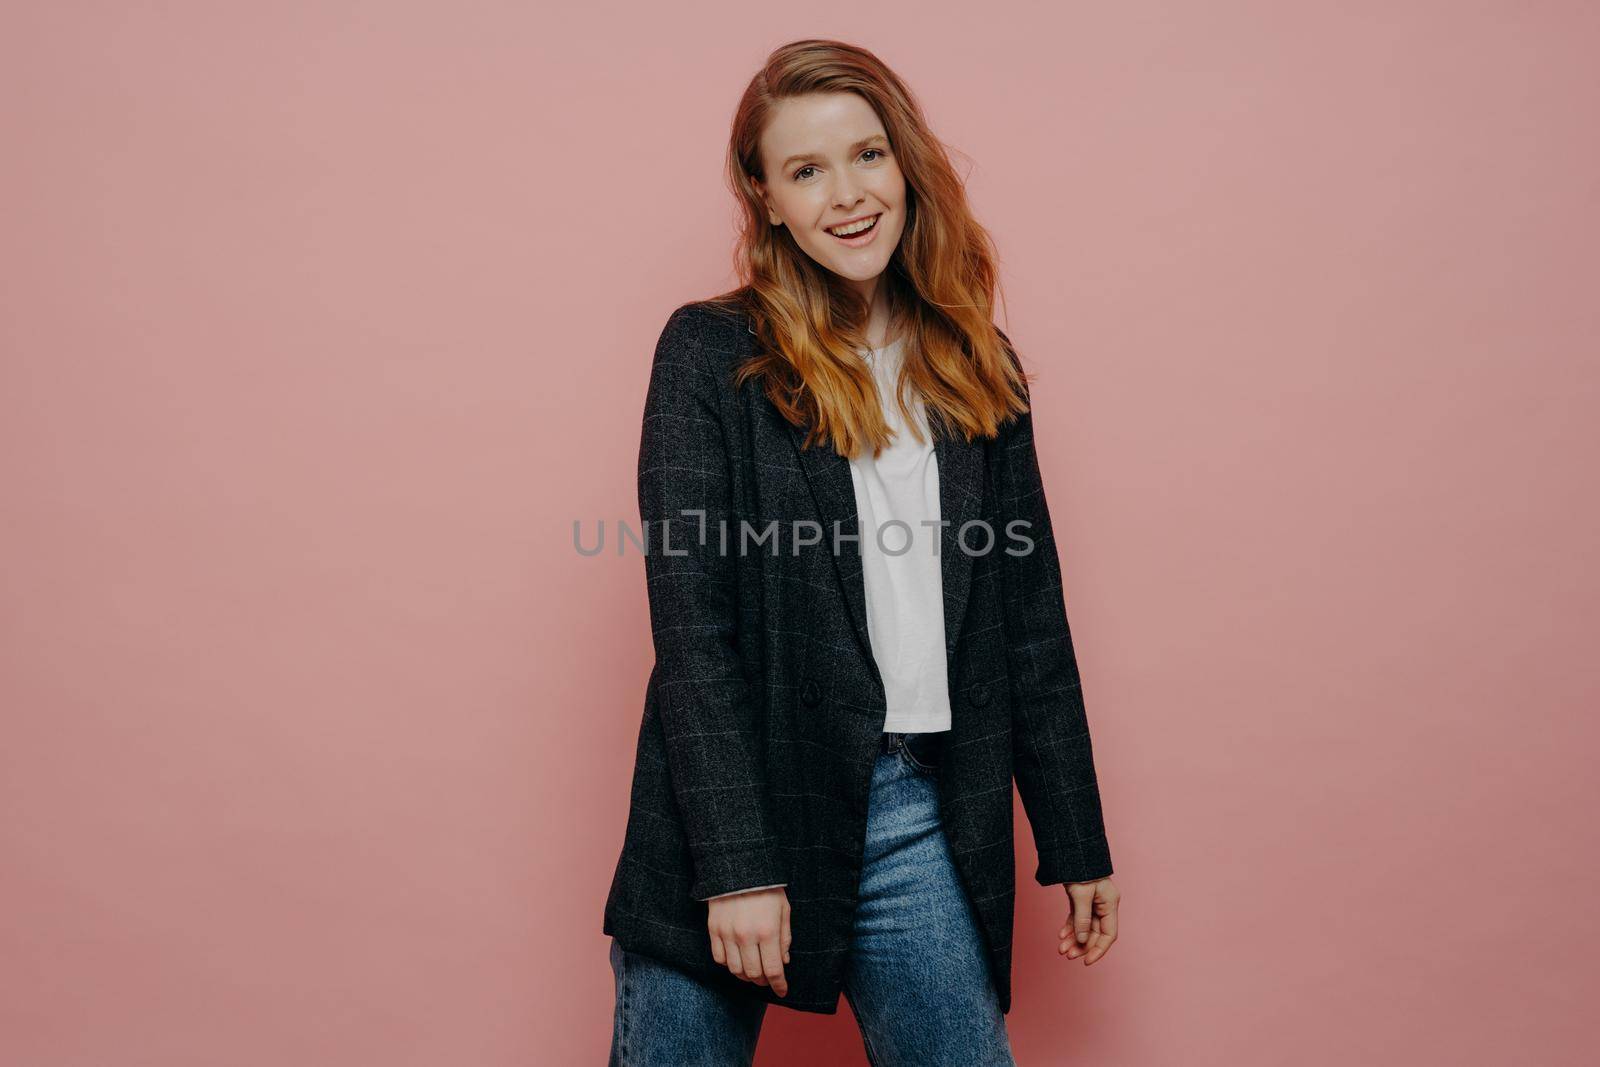 Stylish fashionable young woman wearing plaid blazer and jeans posing in studio, feeling carefree and expressing positive emotions while posing isolated over pink wall background. Happy people concept